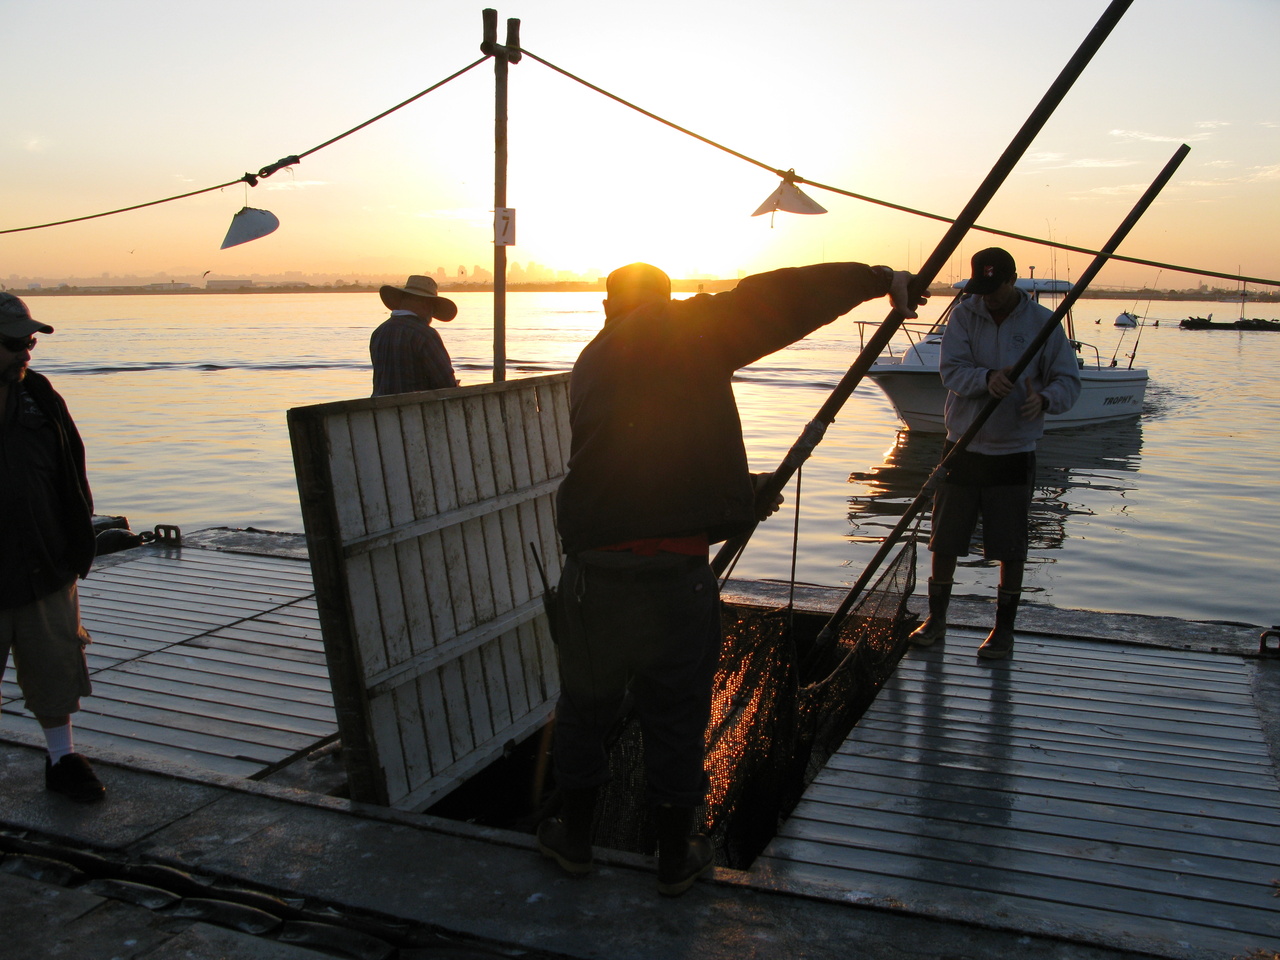 Image: Economics and Human Dimensions of Eastern Pacific and West Coast Fisheries